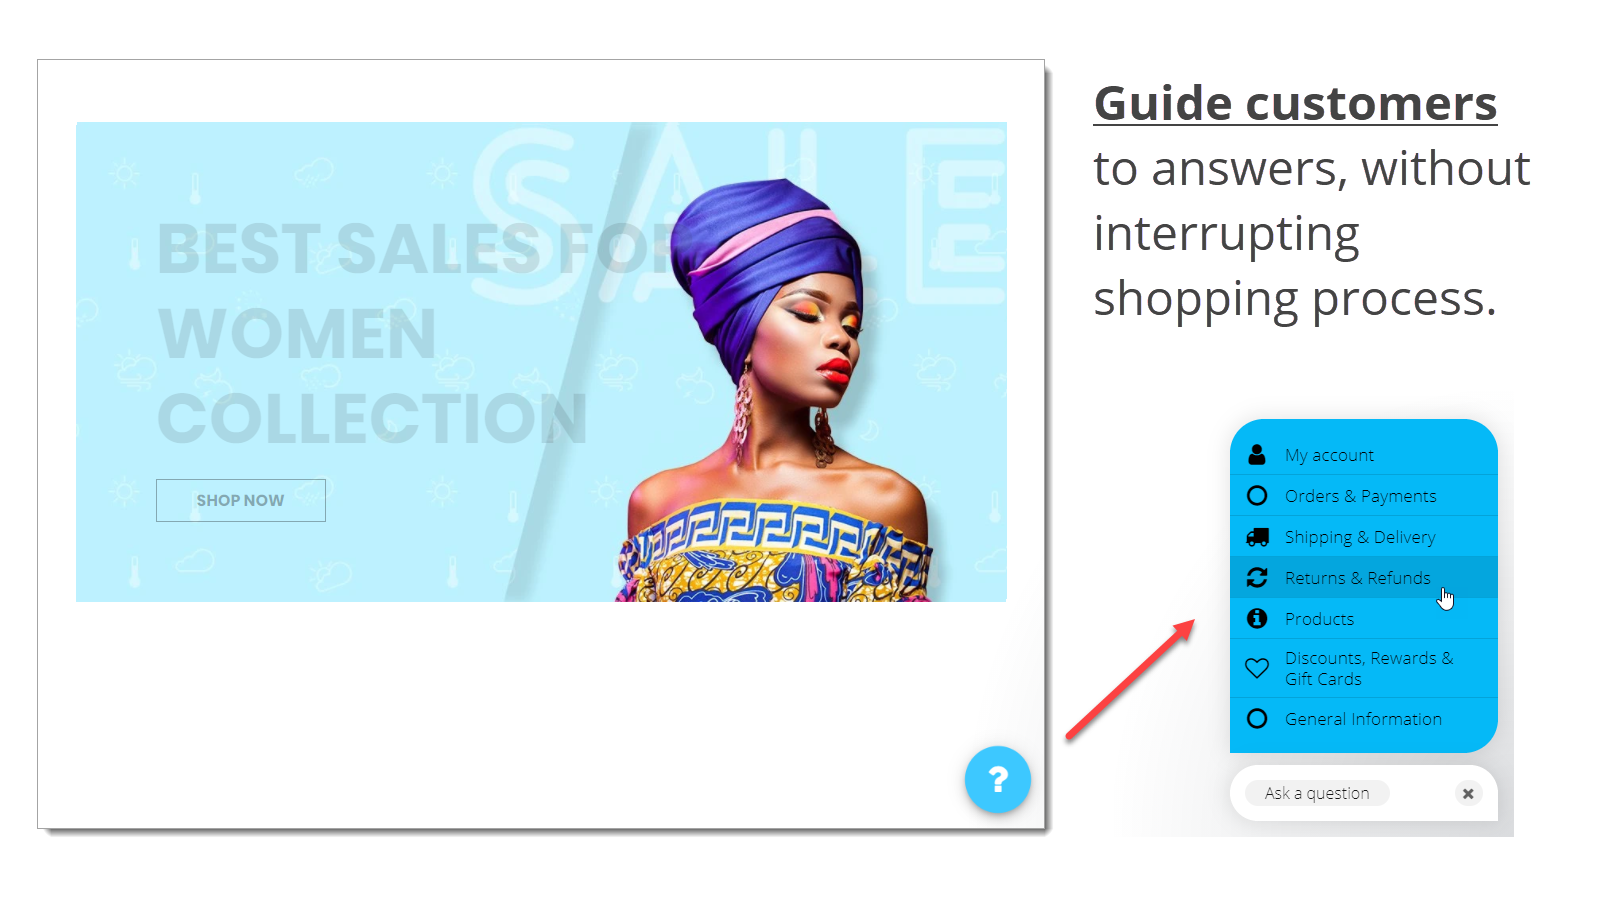 Guide customers to answers w/o interrupting shopping process